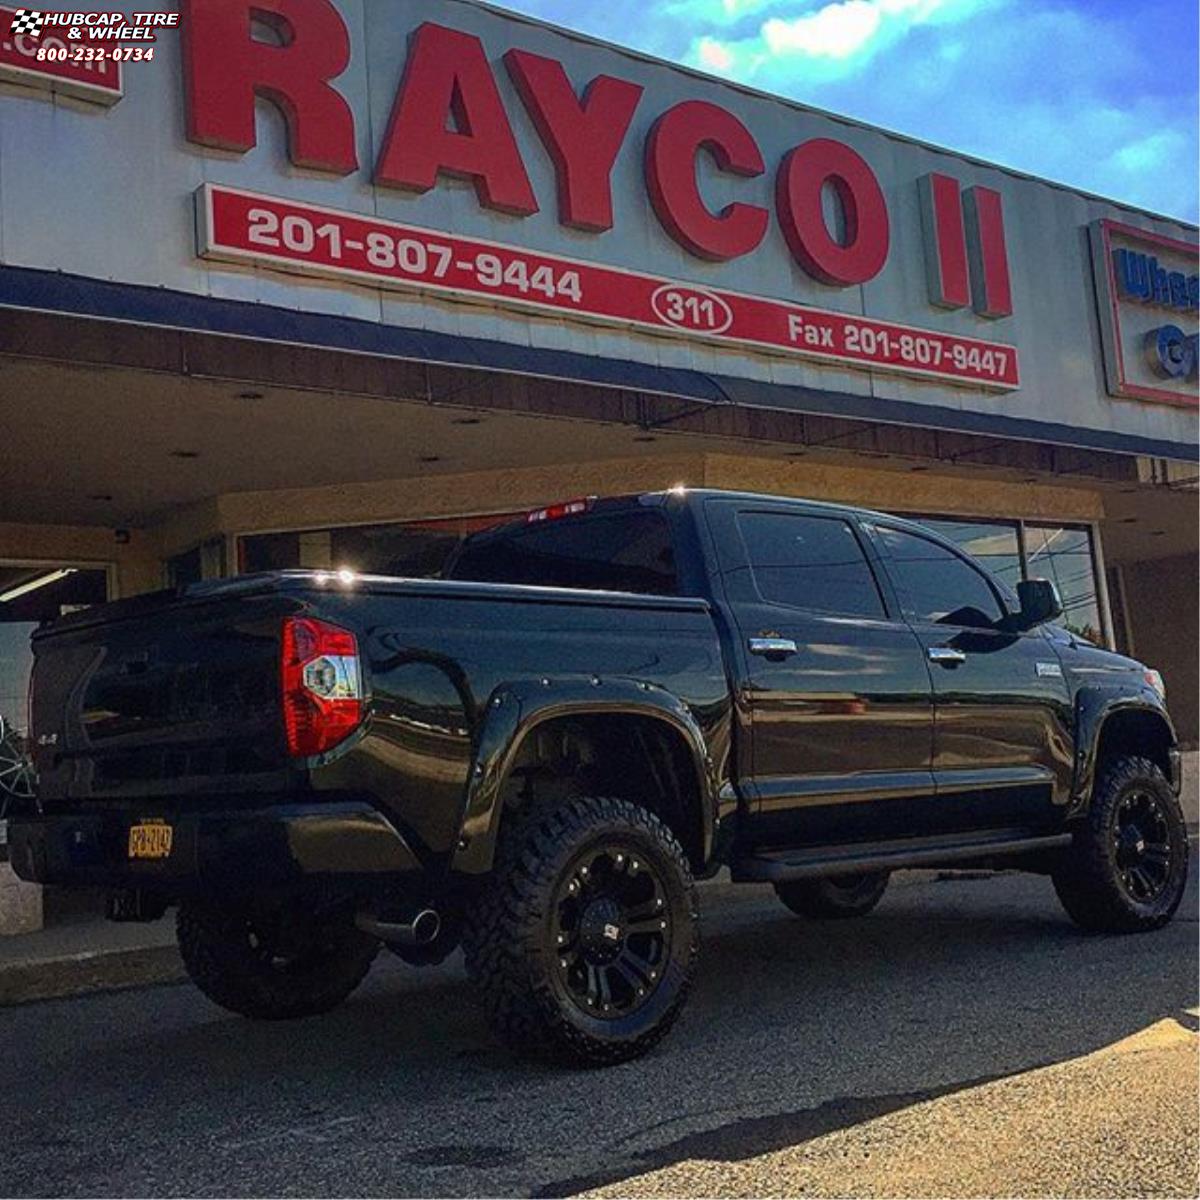 vehicle gallery/2014 toyota tundra xd series xd778 monster x  Matte Black wheels and rims